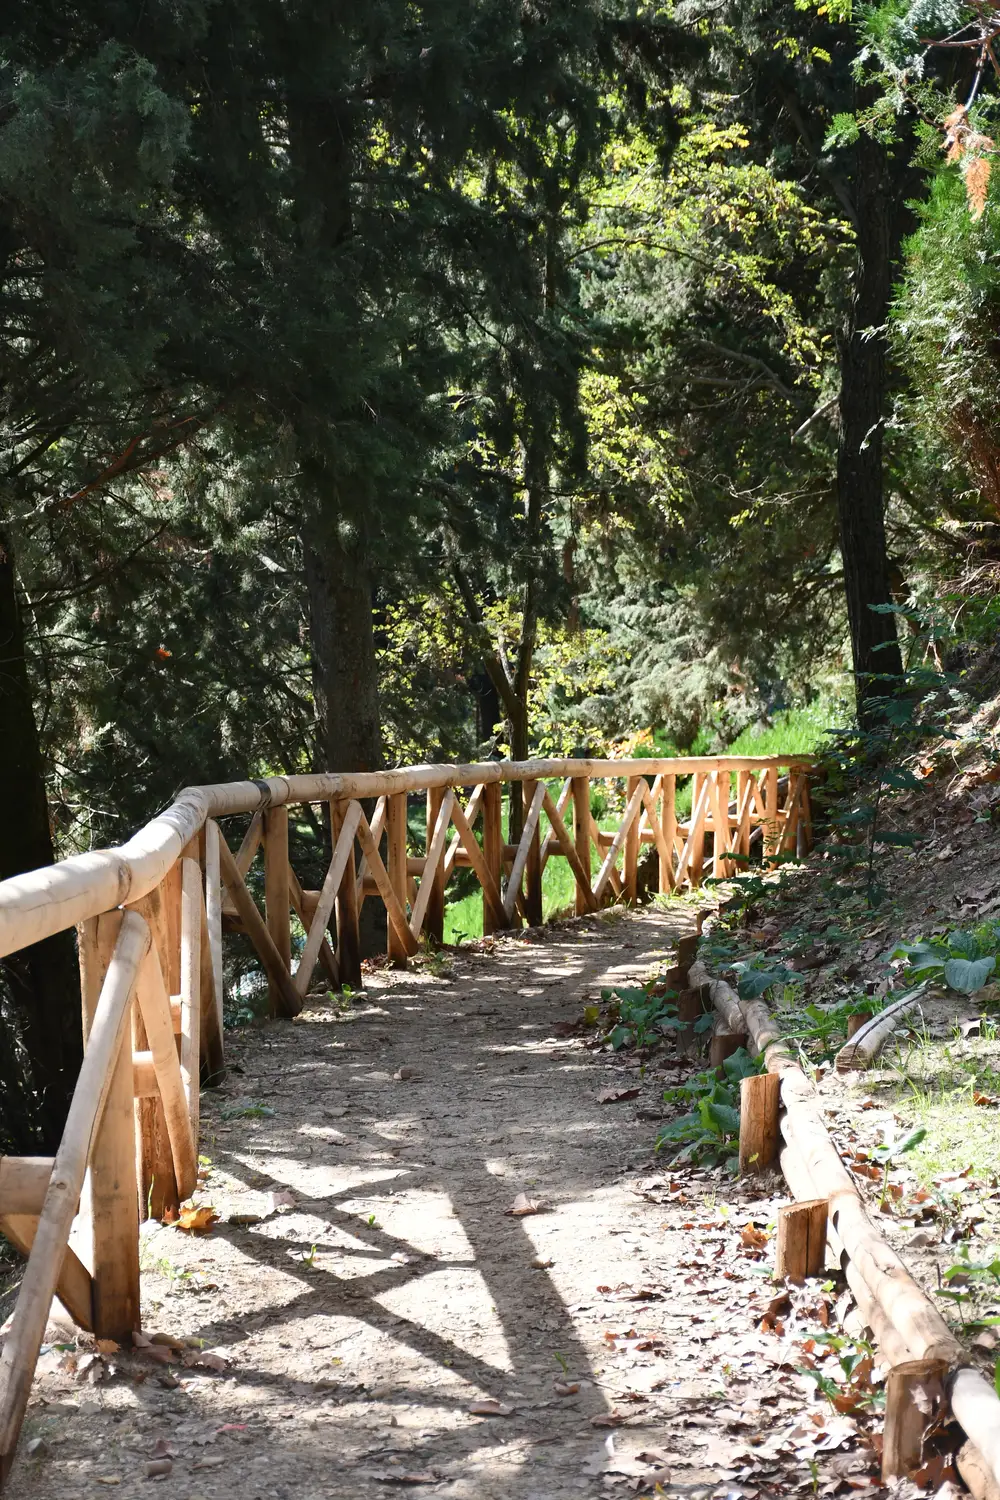 Walk path with wooden rails surrounded by trees